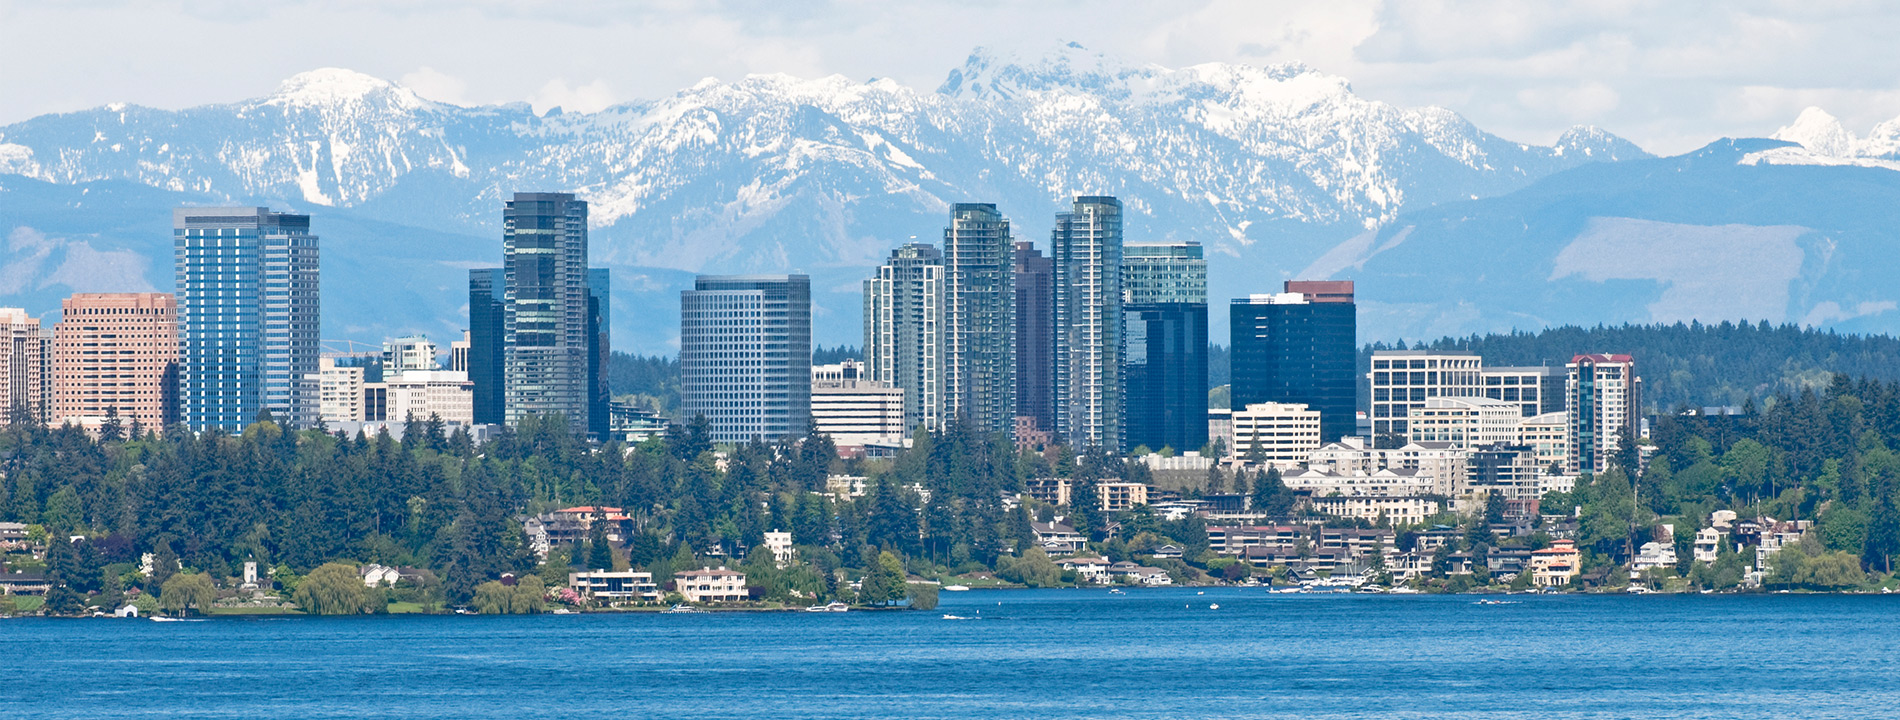 The city of Bellevue with mountains in the back.